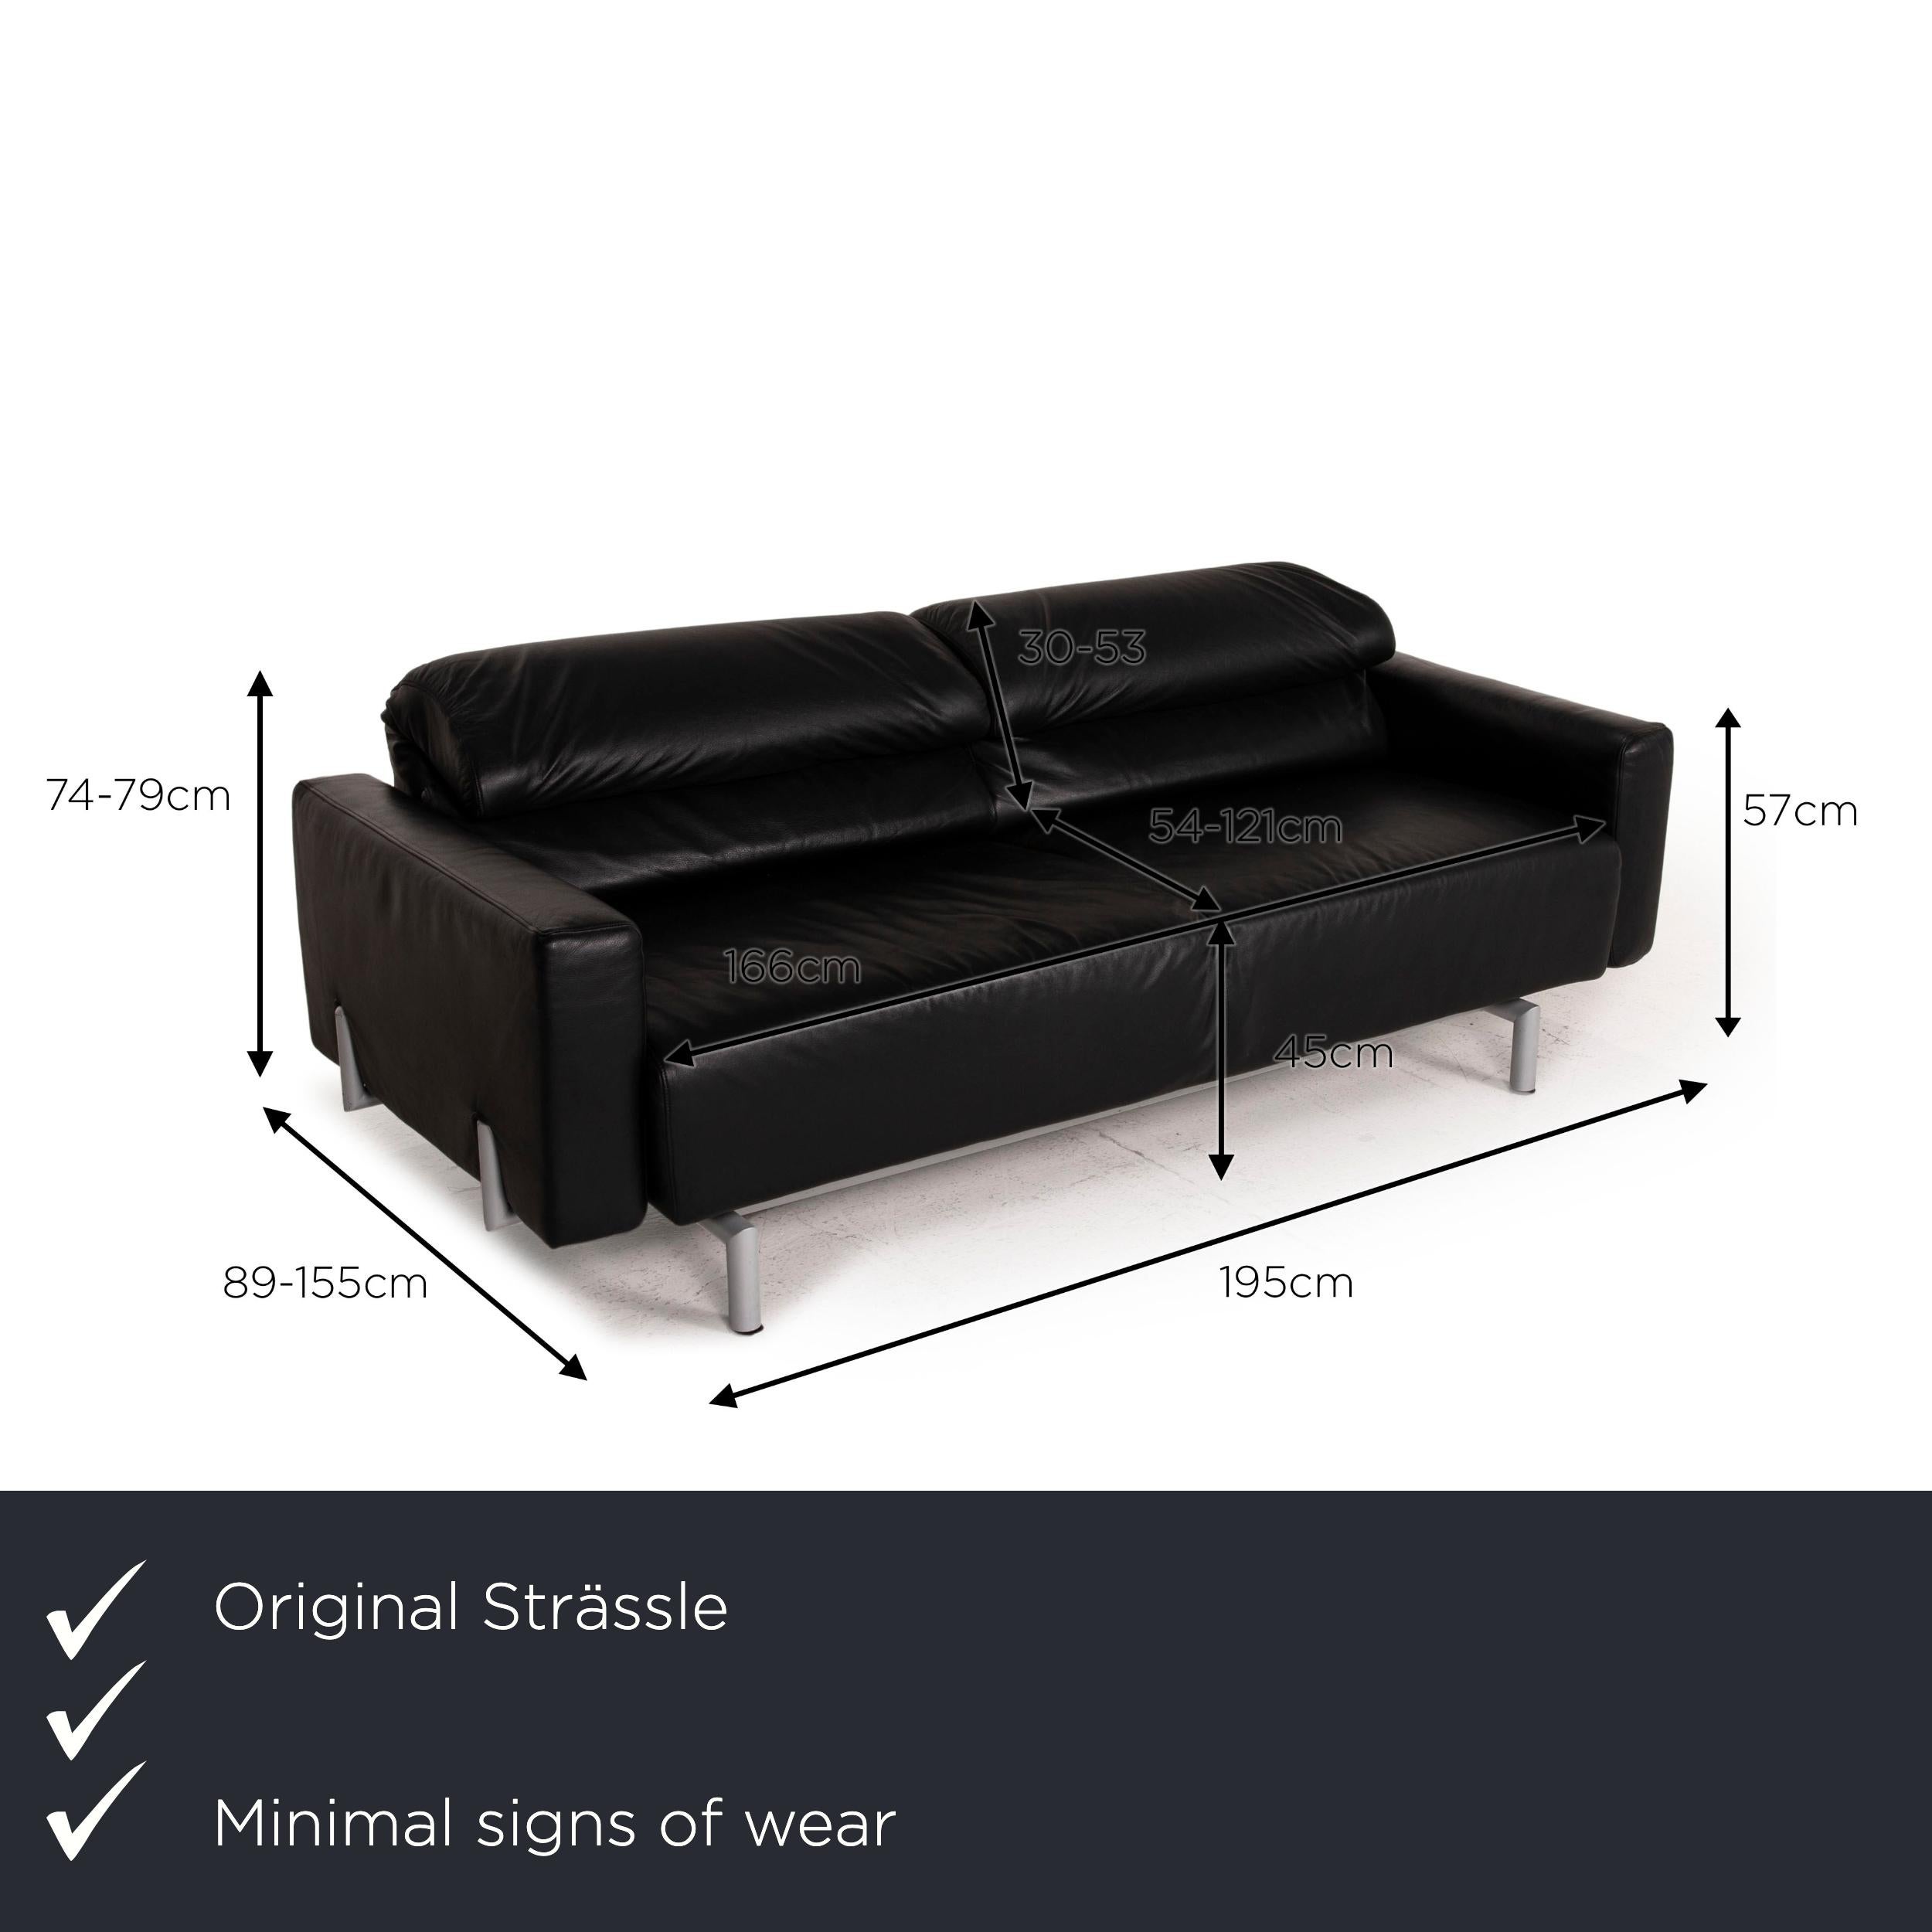 We present to you a Strässle Matteo leather sofa black two-seater function relax function couch.

Product measurements in centimeters:

Depth 89
Width 195
Height 74
Seat height 45
Rest height 57
Seat depth 54
Seat width 166
Back height